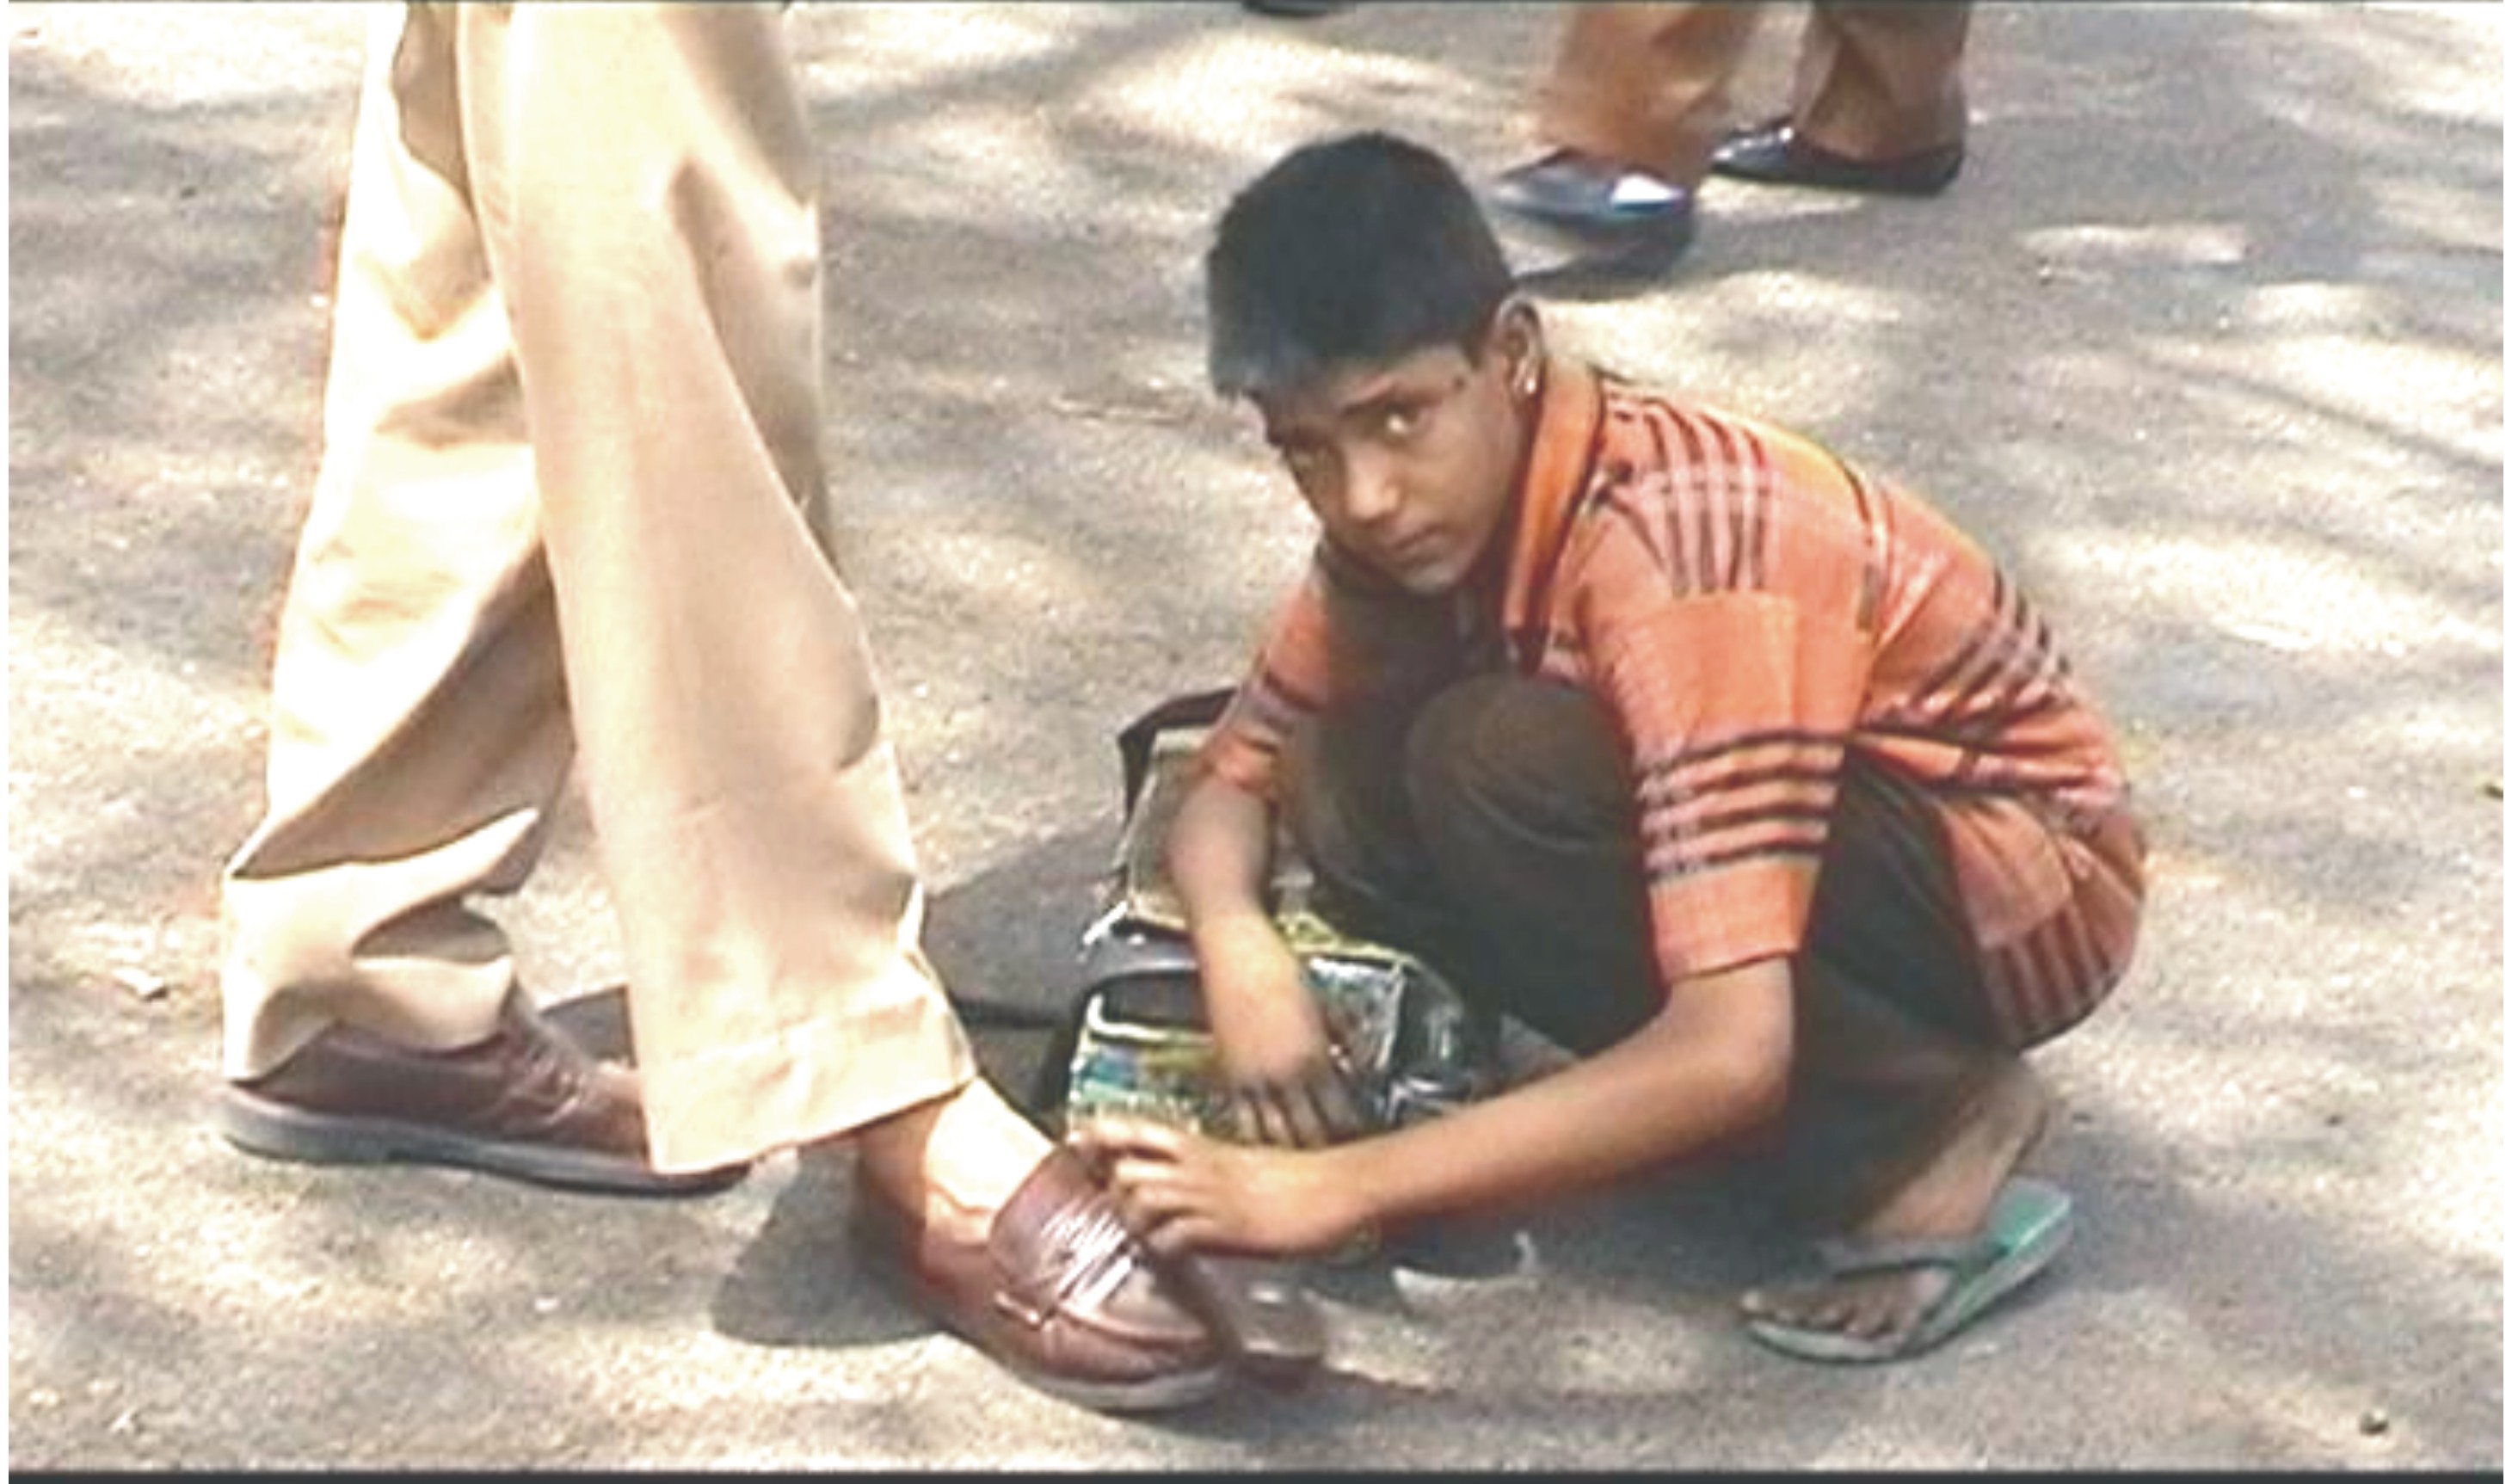 childlabour with profession of shoe polish